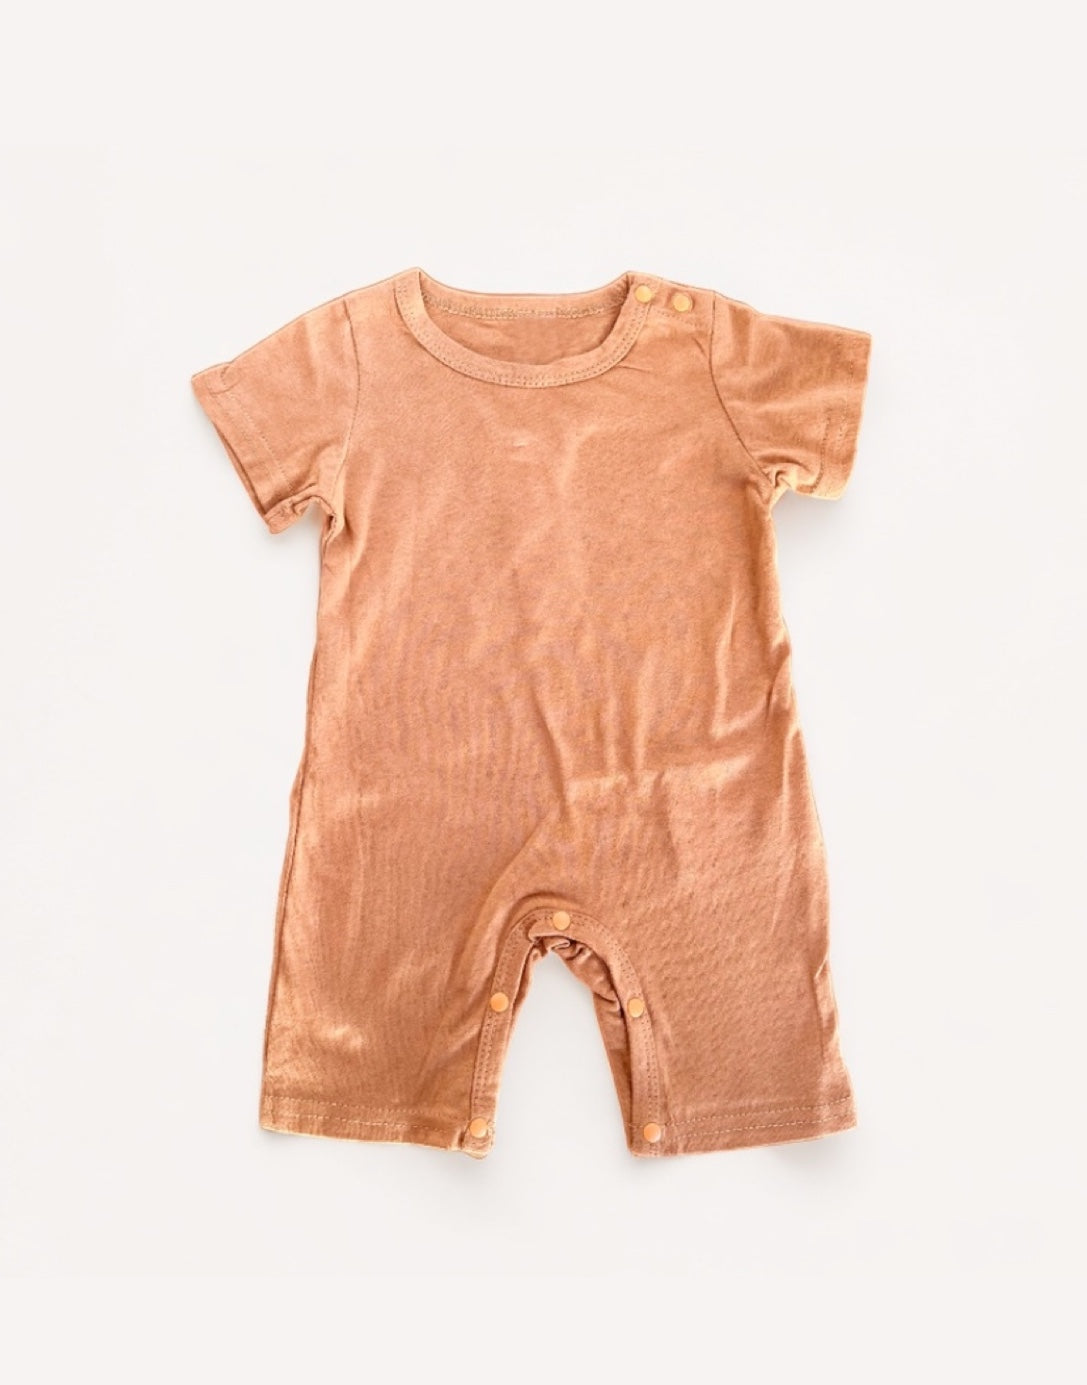 Front view of Baby Crew Neck T-Shirt Romper.